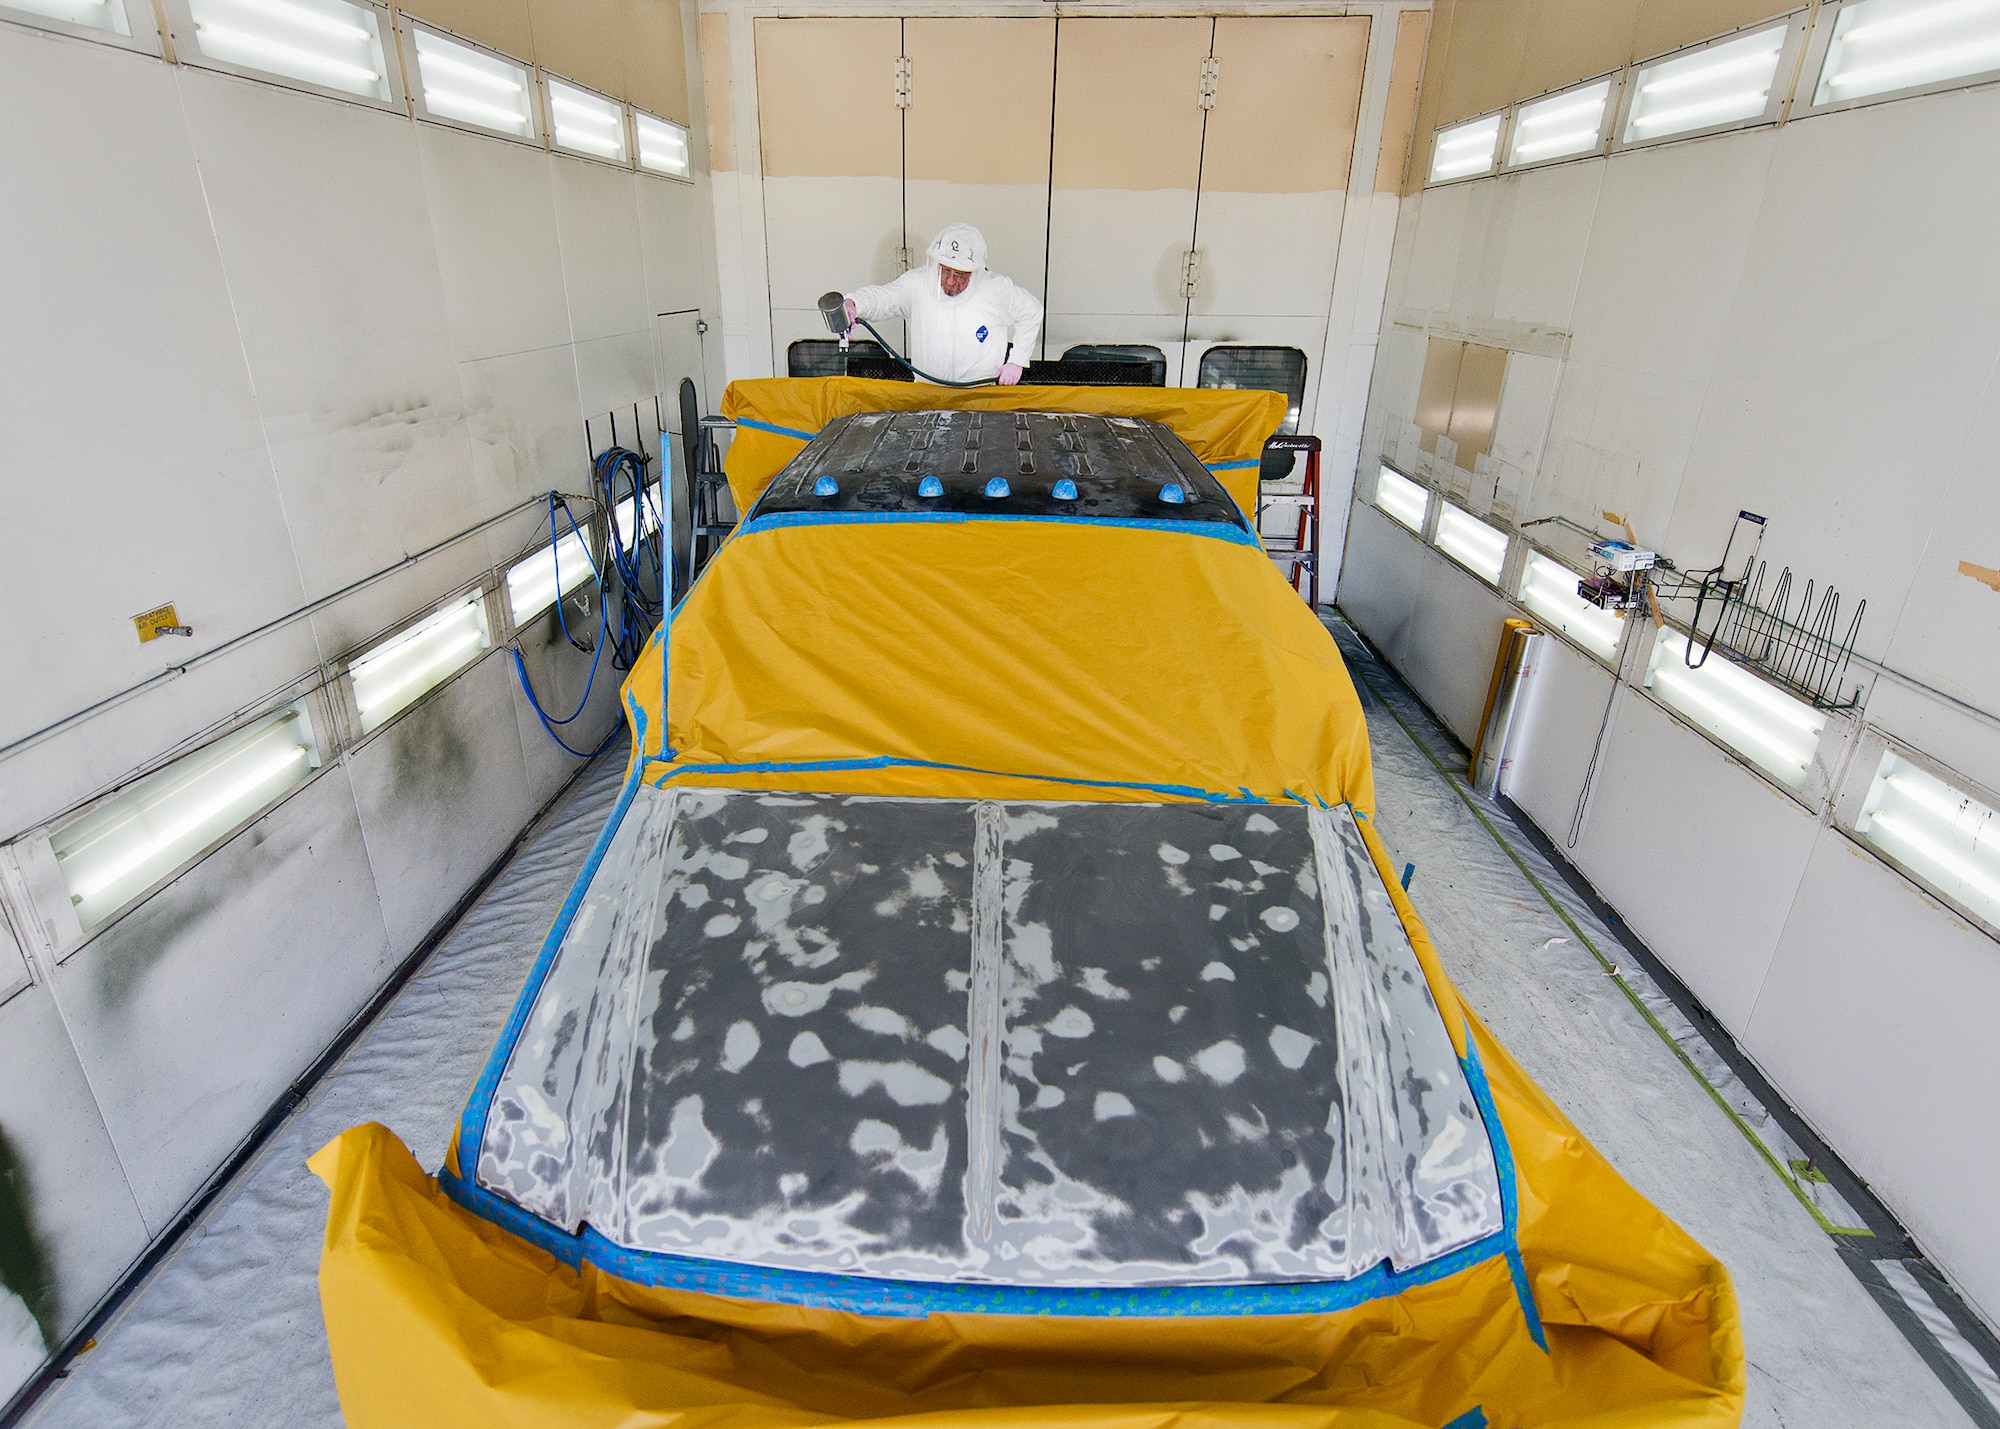 Henry Isaacs prepares to paint the roof of a truck Aug. 20, 2014, at Eglin Air Force Base, Fla. Repainting vehicle parts affected by the sun and weather is part of 96th Logistics Readiness Squadron’s corrosion control program. A three-person team is responsible for restoring and extending the lives of Eglin AFB’s vehicle fleet. Approximately 50 vehicles per year are painted by the team. Isaacs is assigned to the 96th LRS. (U.S. Air Force photo/Samuel King Jr.)